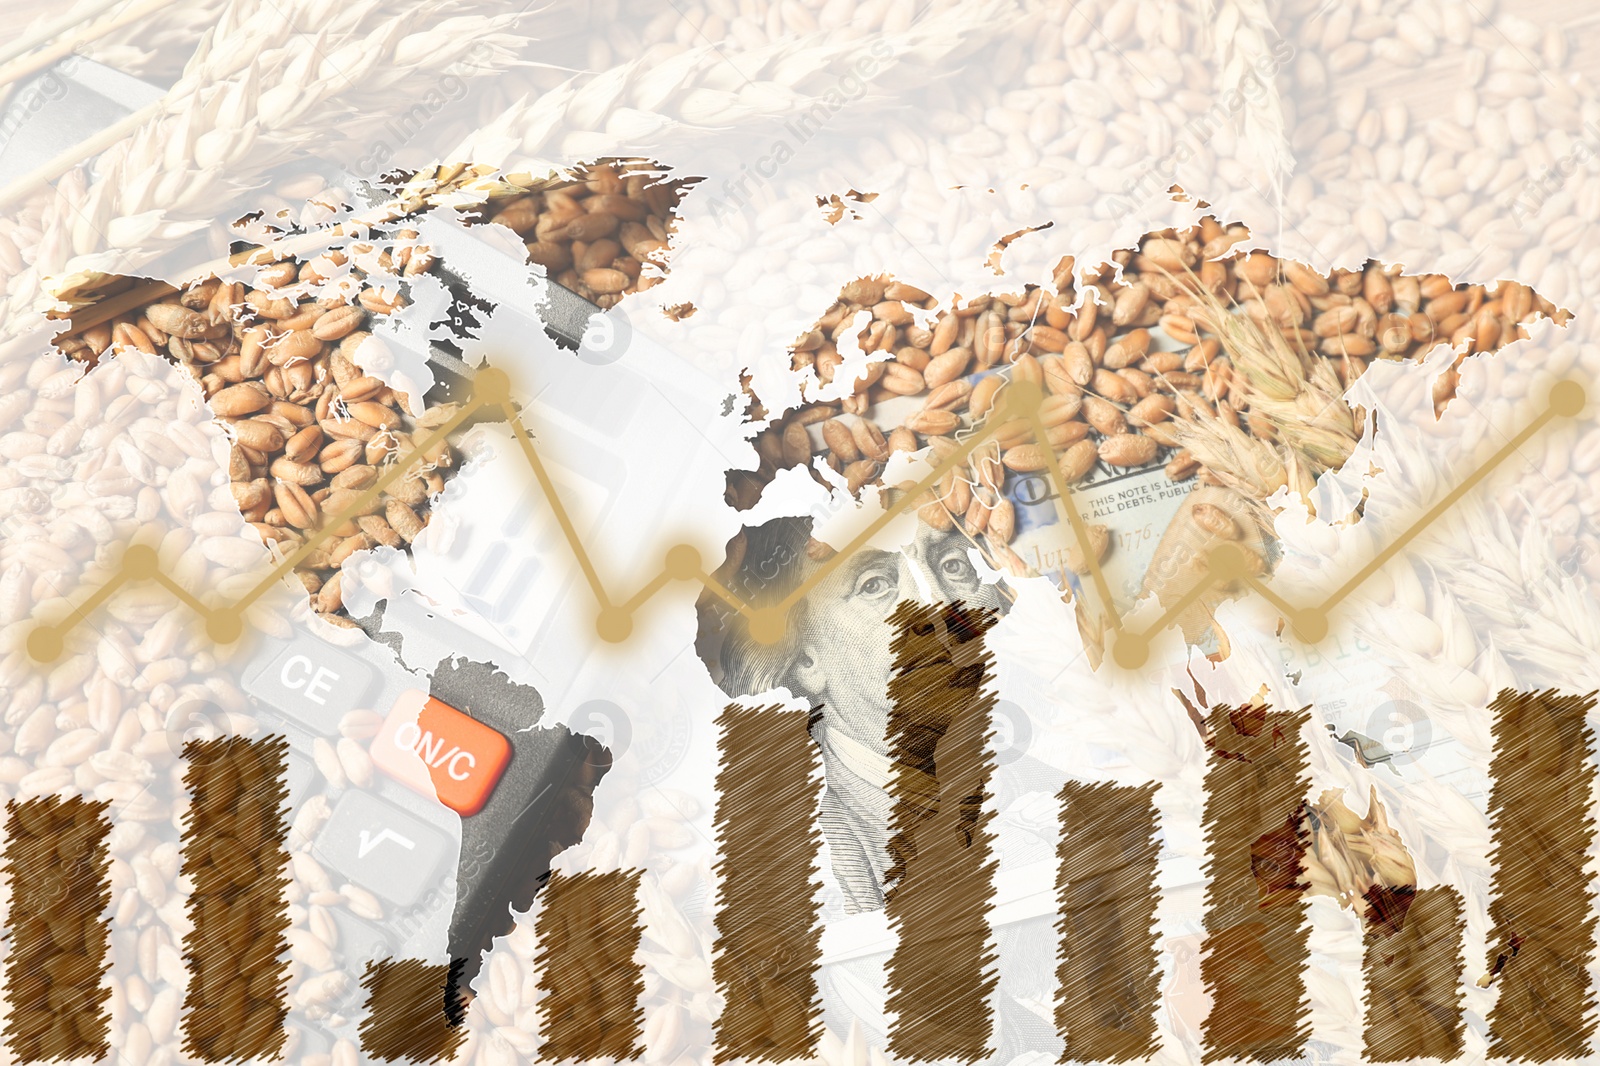 Image of Grain prices. Ears of wheat, seeds, money, world map and graph, multiple exposure